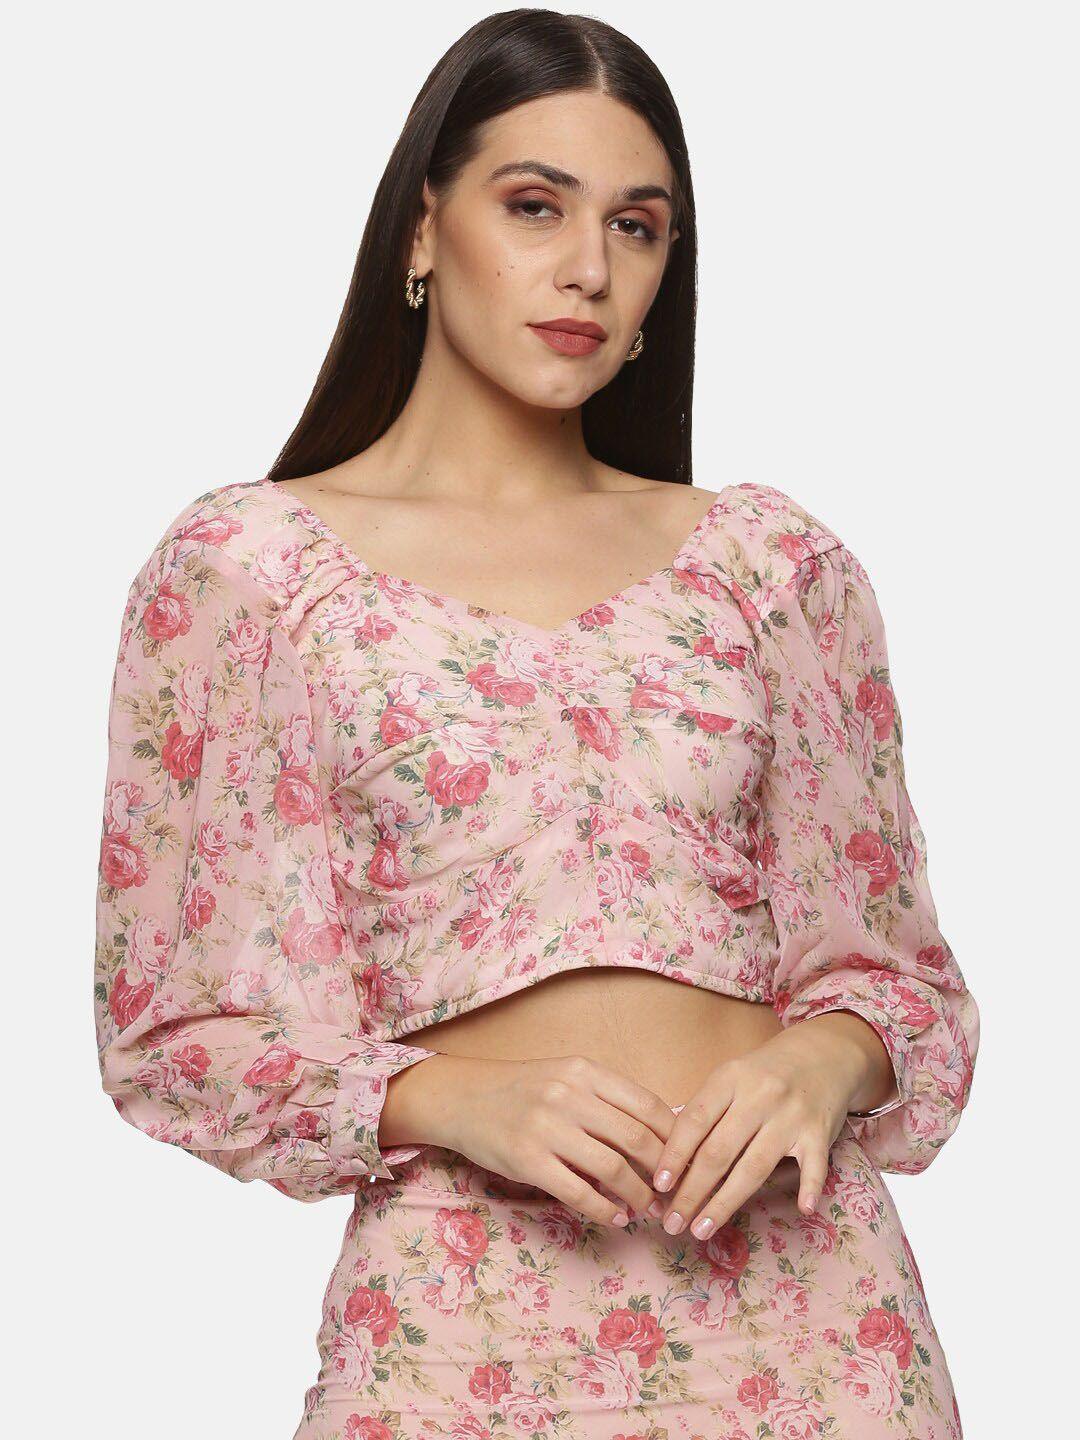 here&now-floral-print-sweetheart-neck-chiffon-crop-top